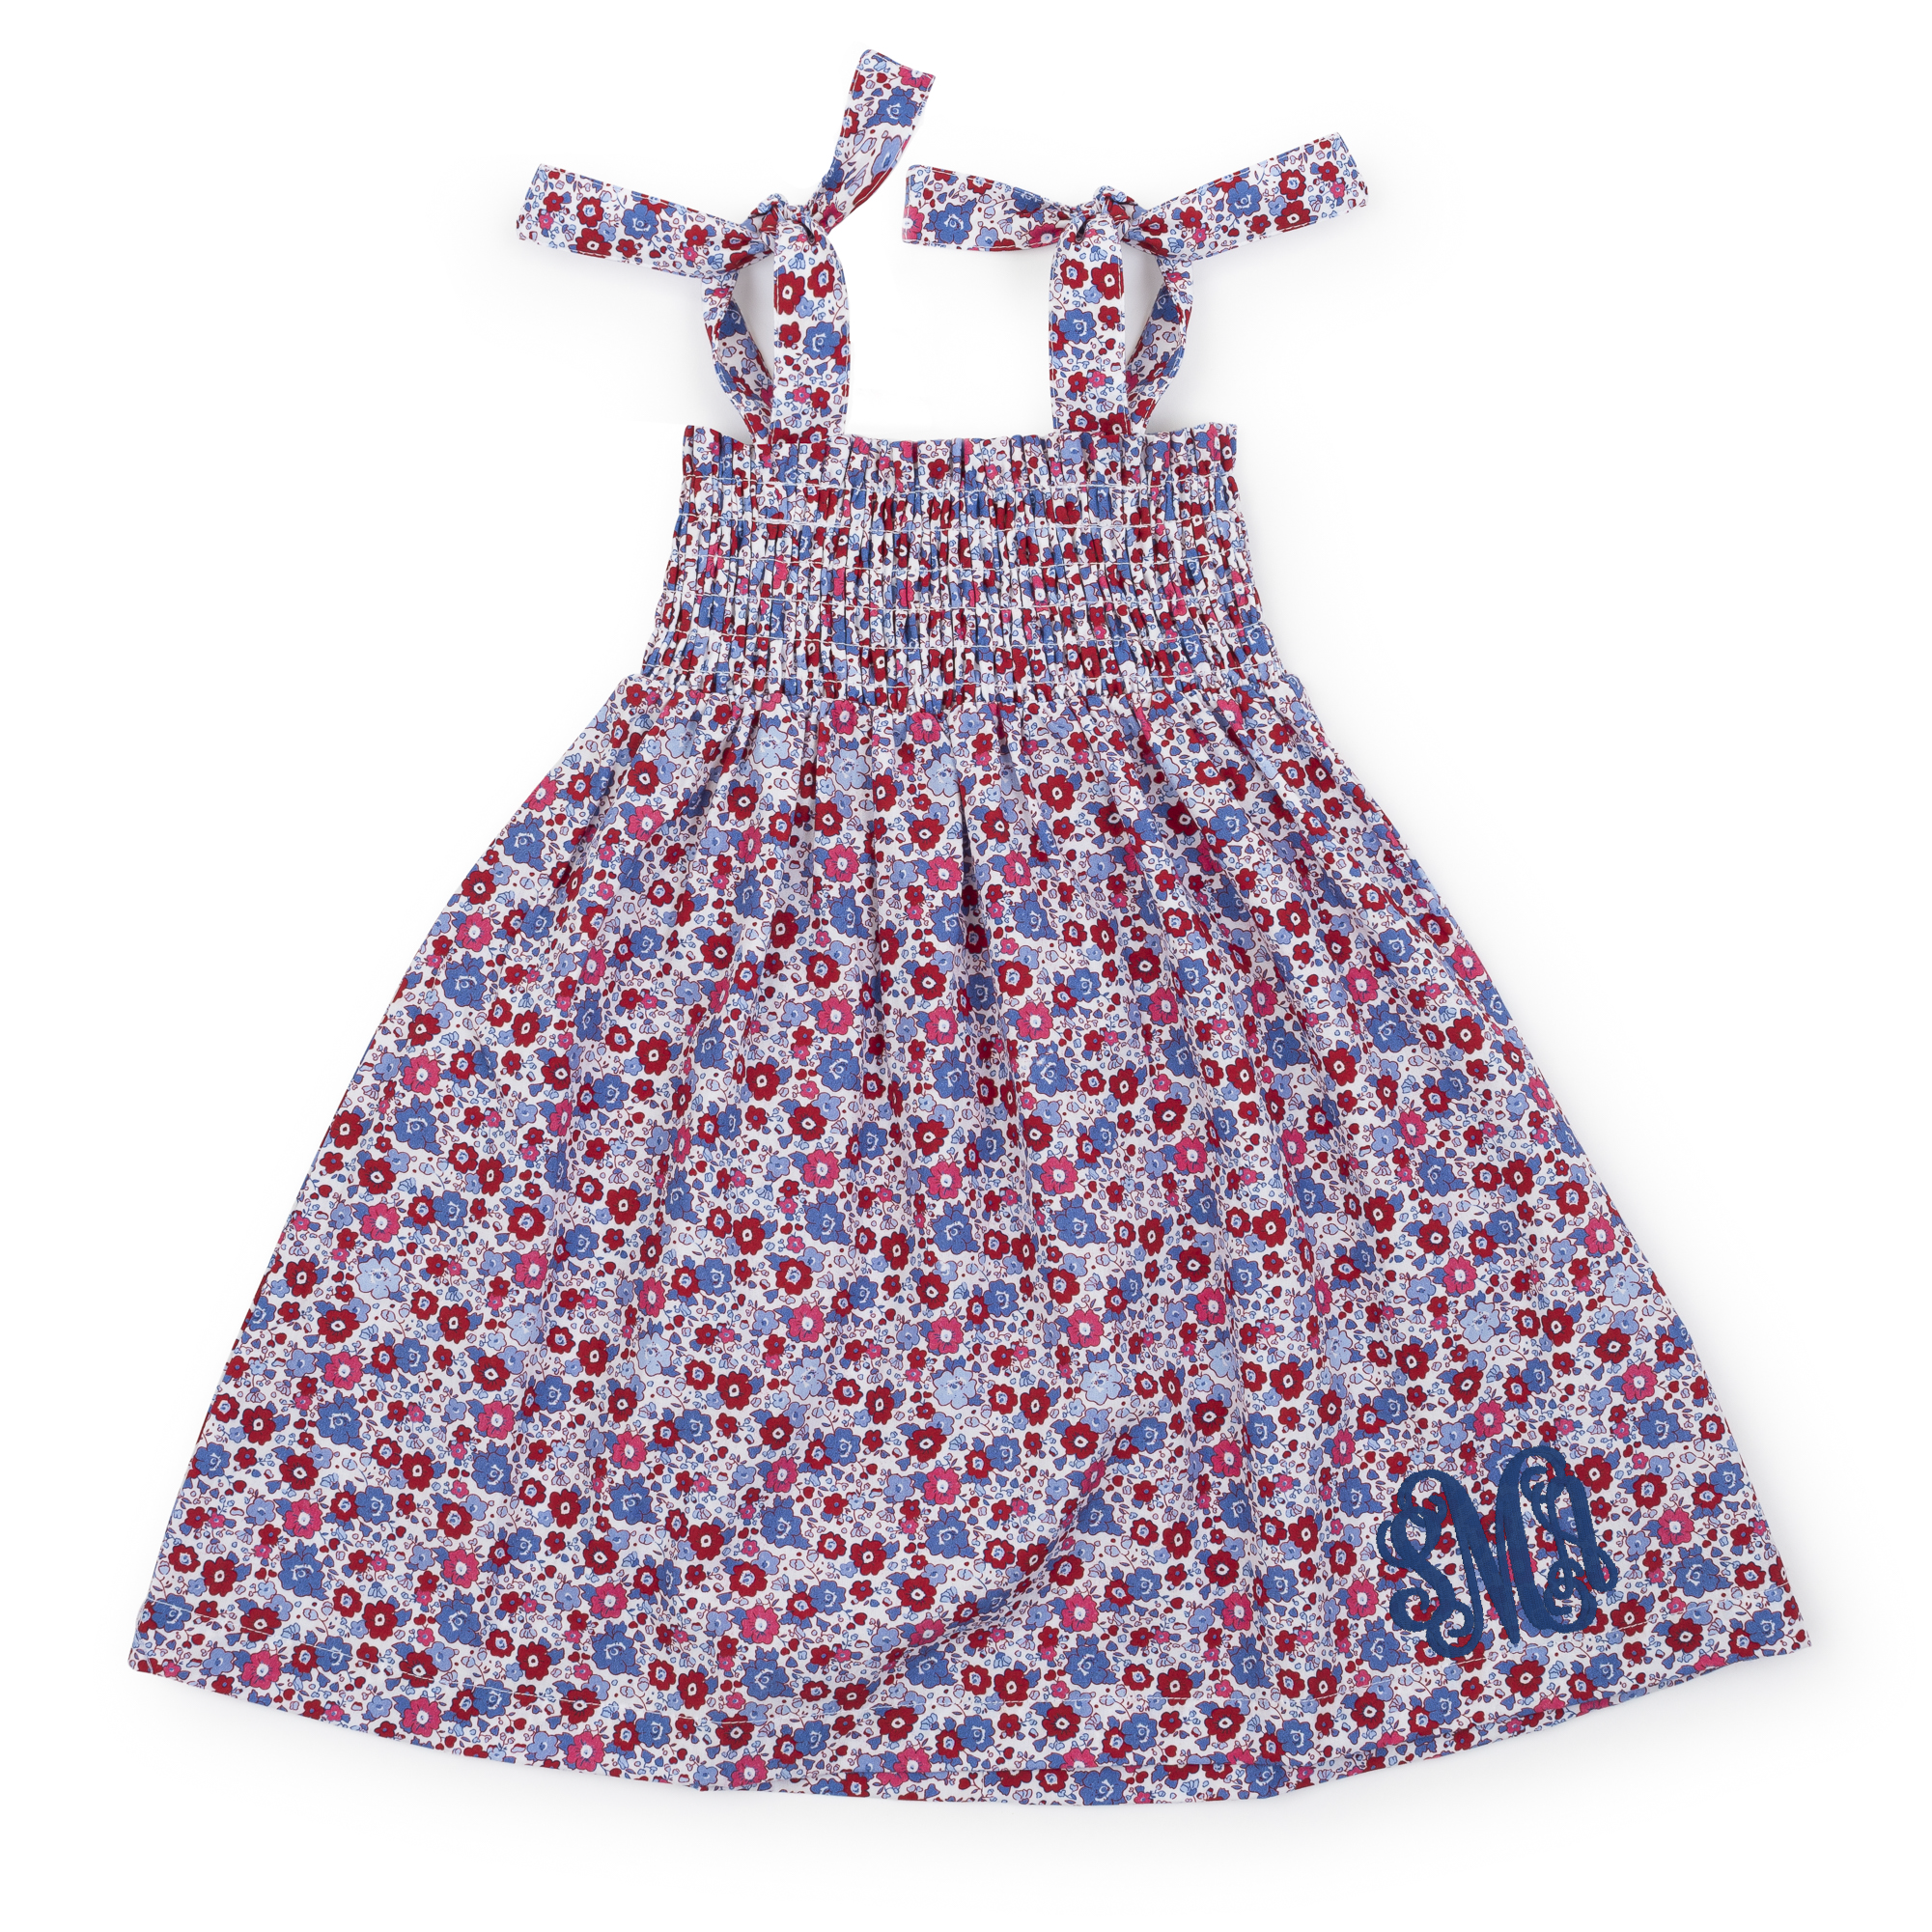 Betsy Girls' Woven Pima Cotton Dress - Freedom Floral